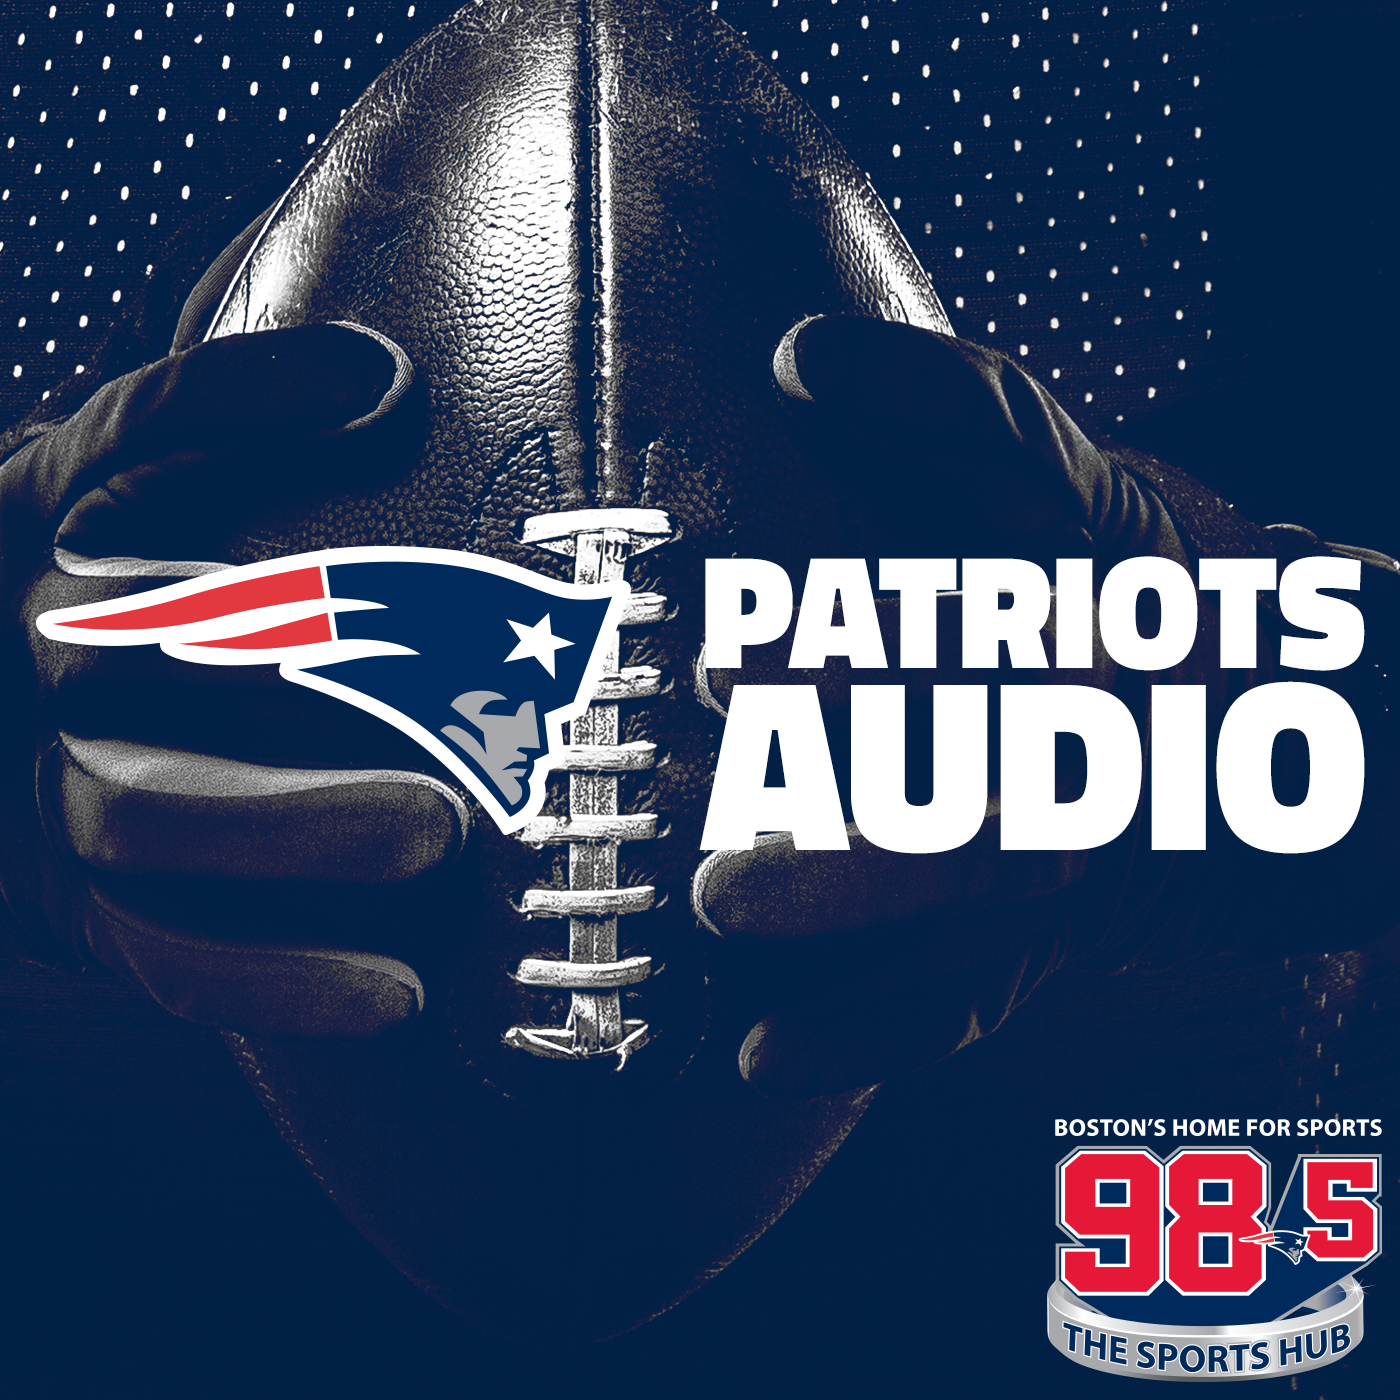 Jonathan Kraft checks in with Beetle & Gasper as we get set for Pats-Jets